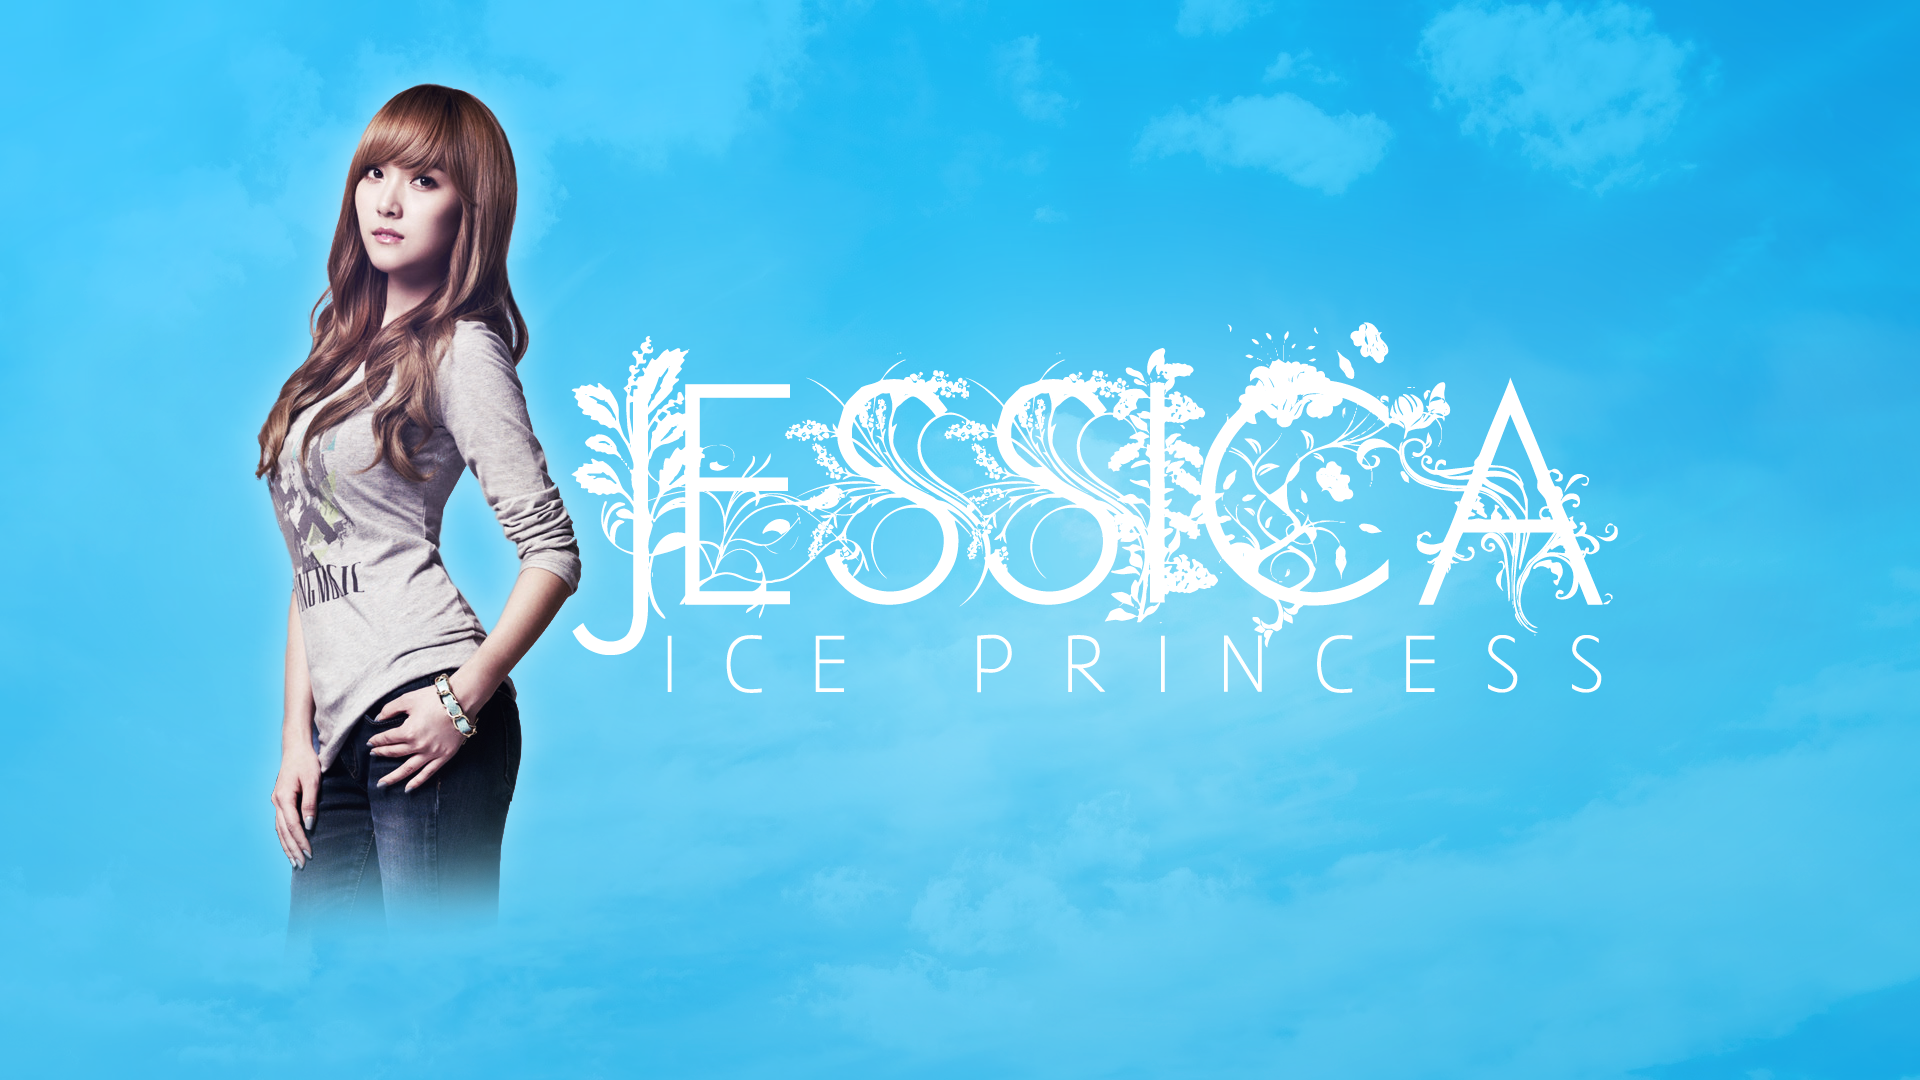 Jessica Snsd Wallpaper By Ninquo